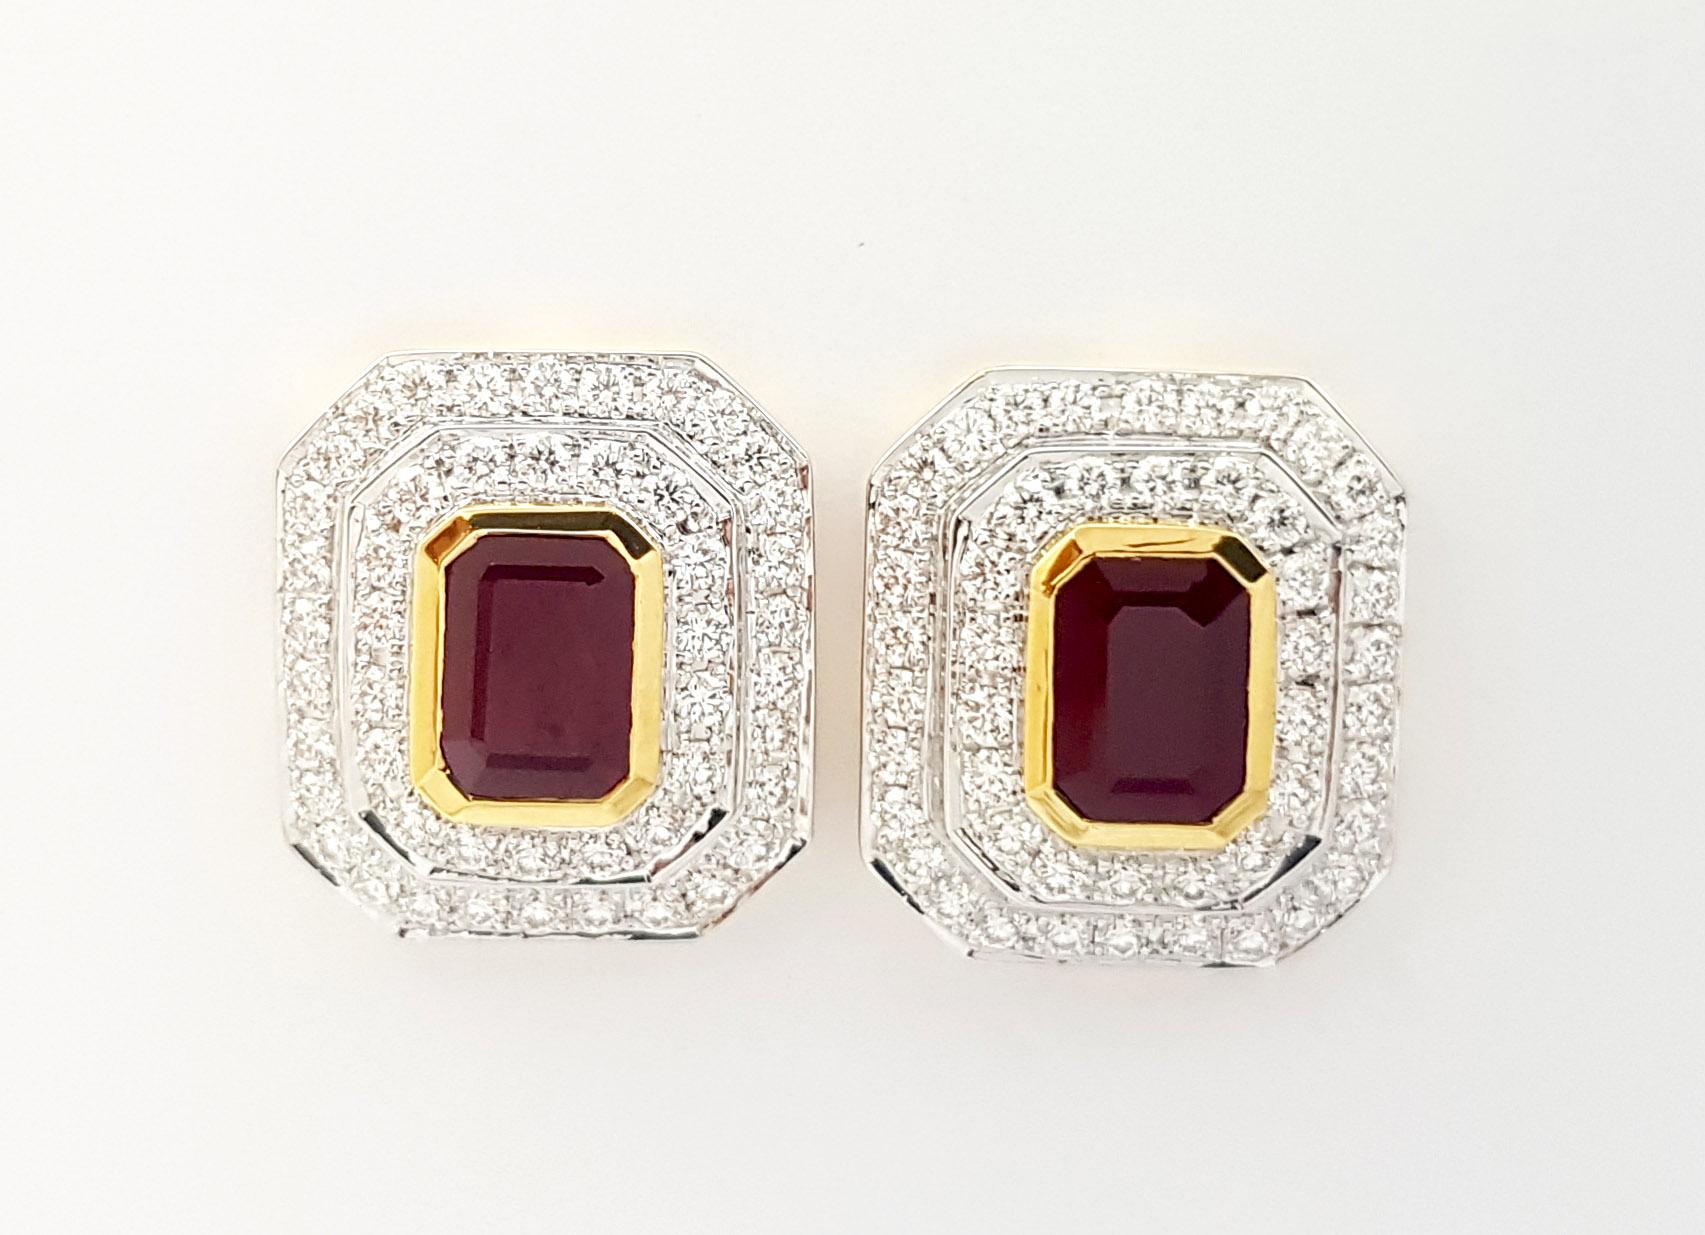 Ruby 2.20 carats with Diamond 1.02 carat Earrings set in 18 Karat Gold Settings

Width: 1.3 cm 
Length: 1.5 cm
Total Weight: 8.18 grams

